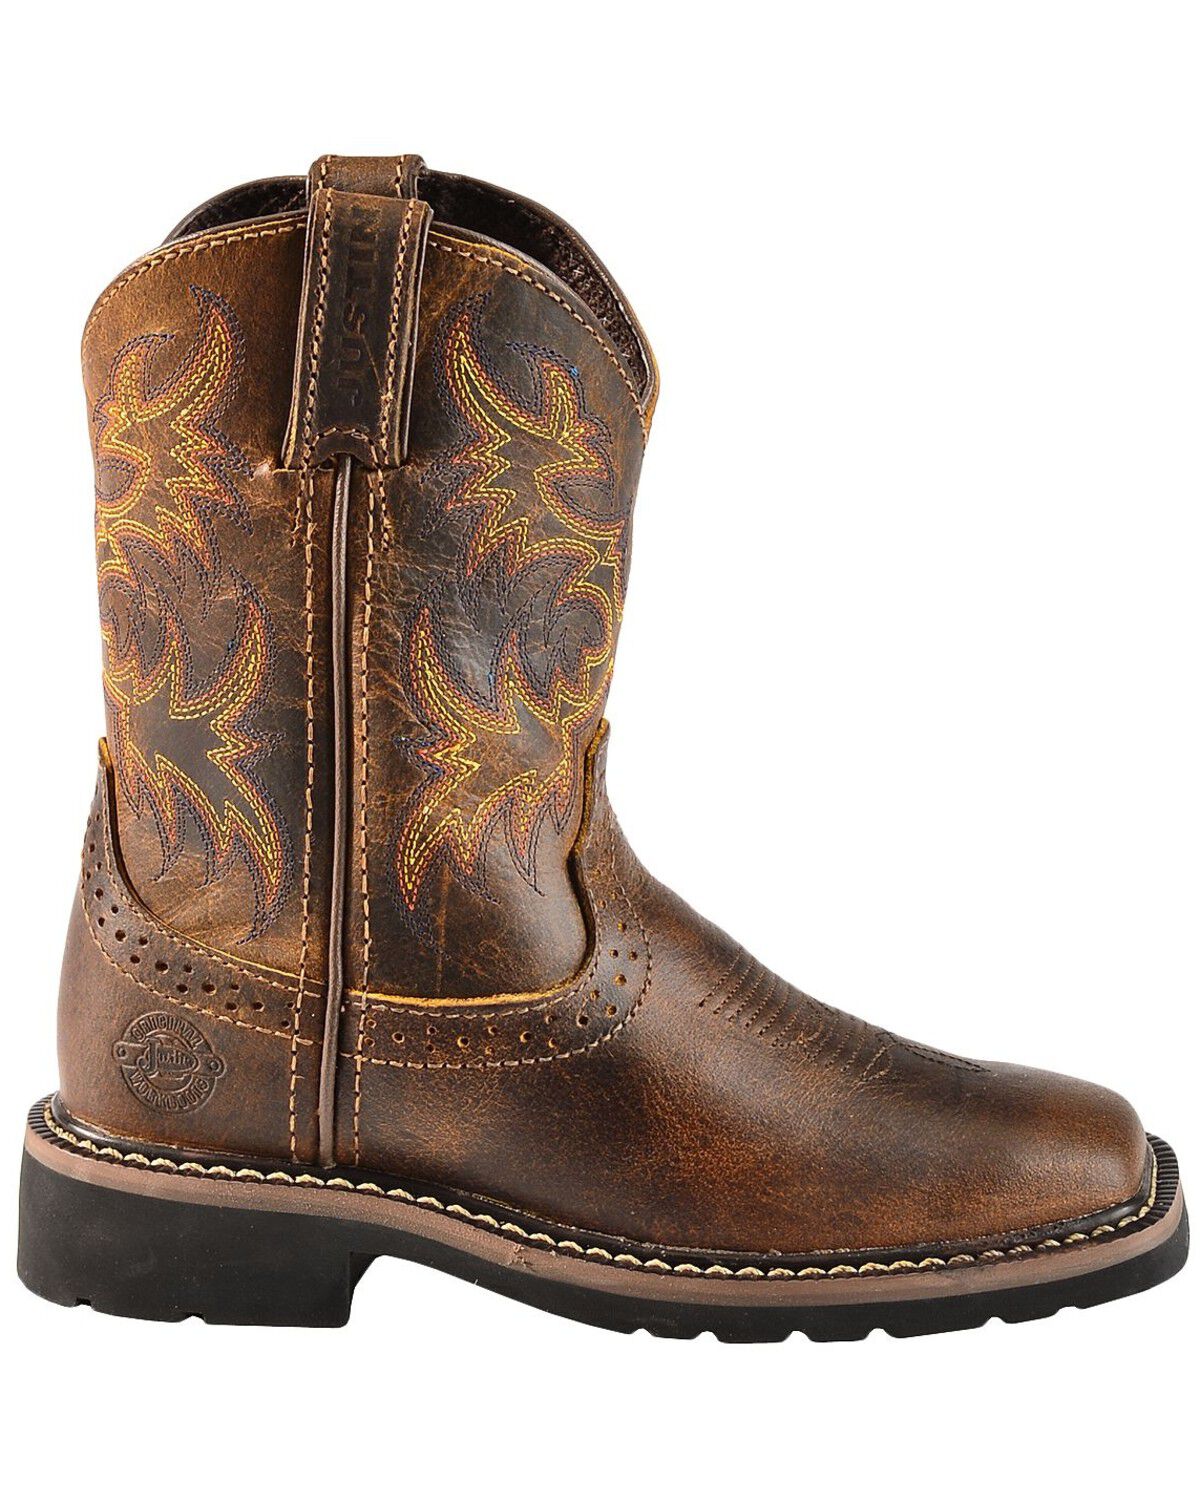 Boots - Square Toe - Country Outfitter